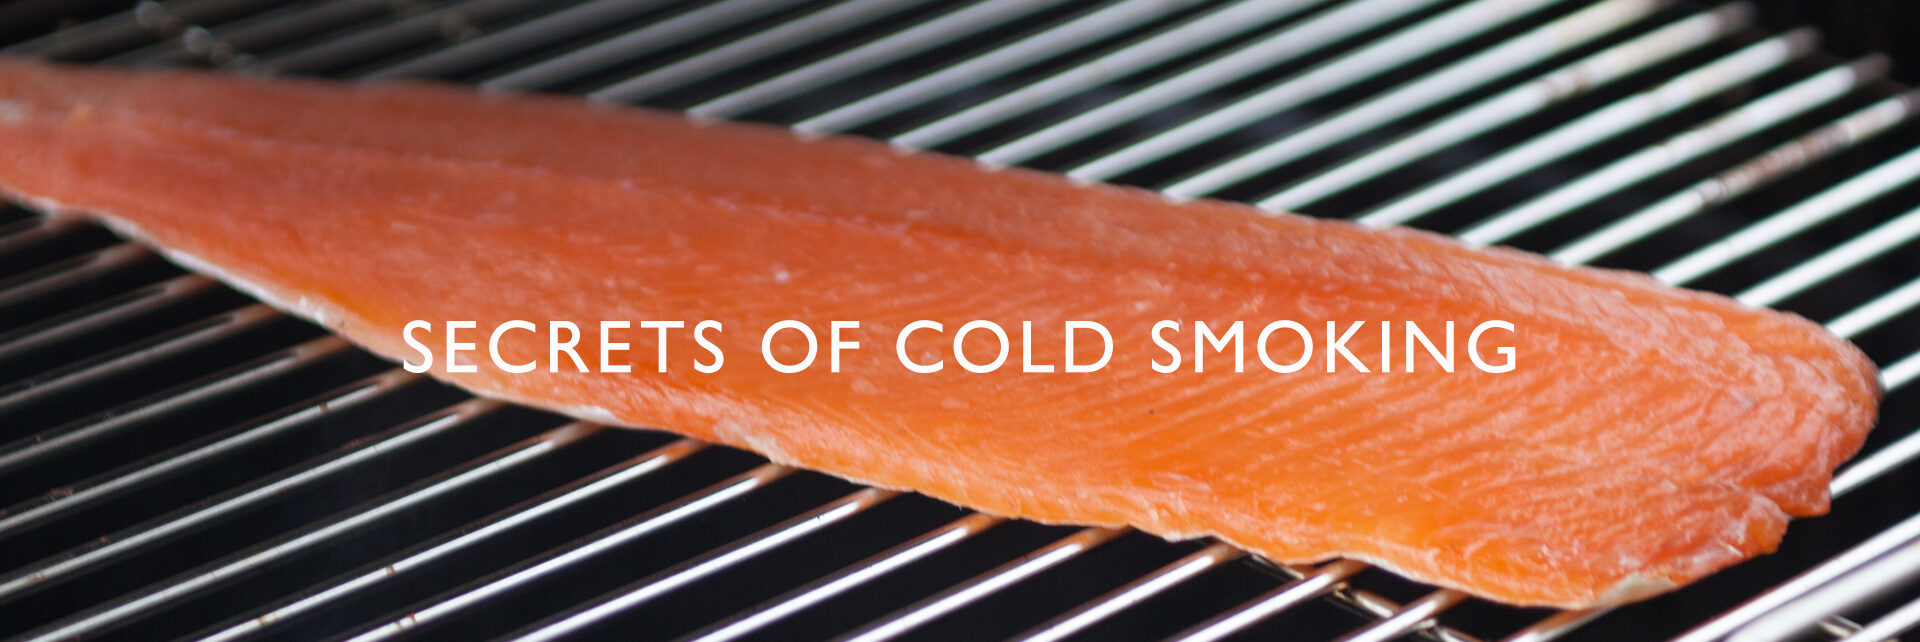 Hot Smoked's Secrets of Cold Smoking